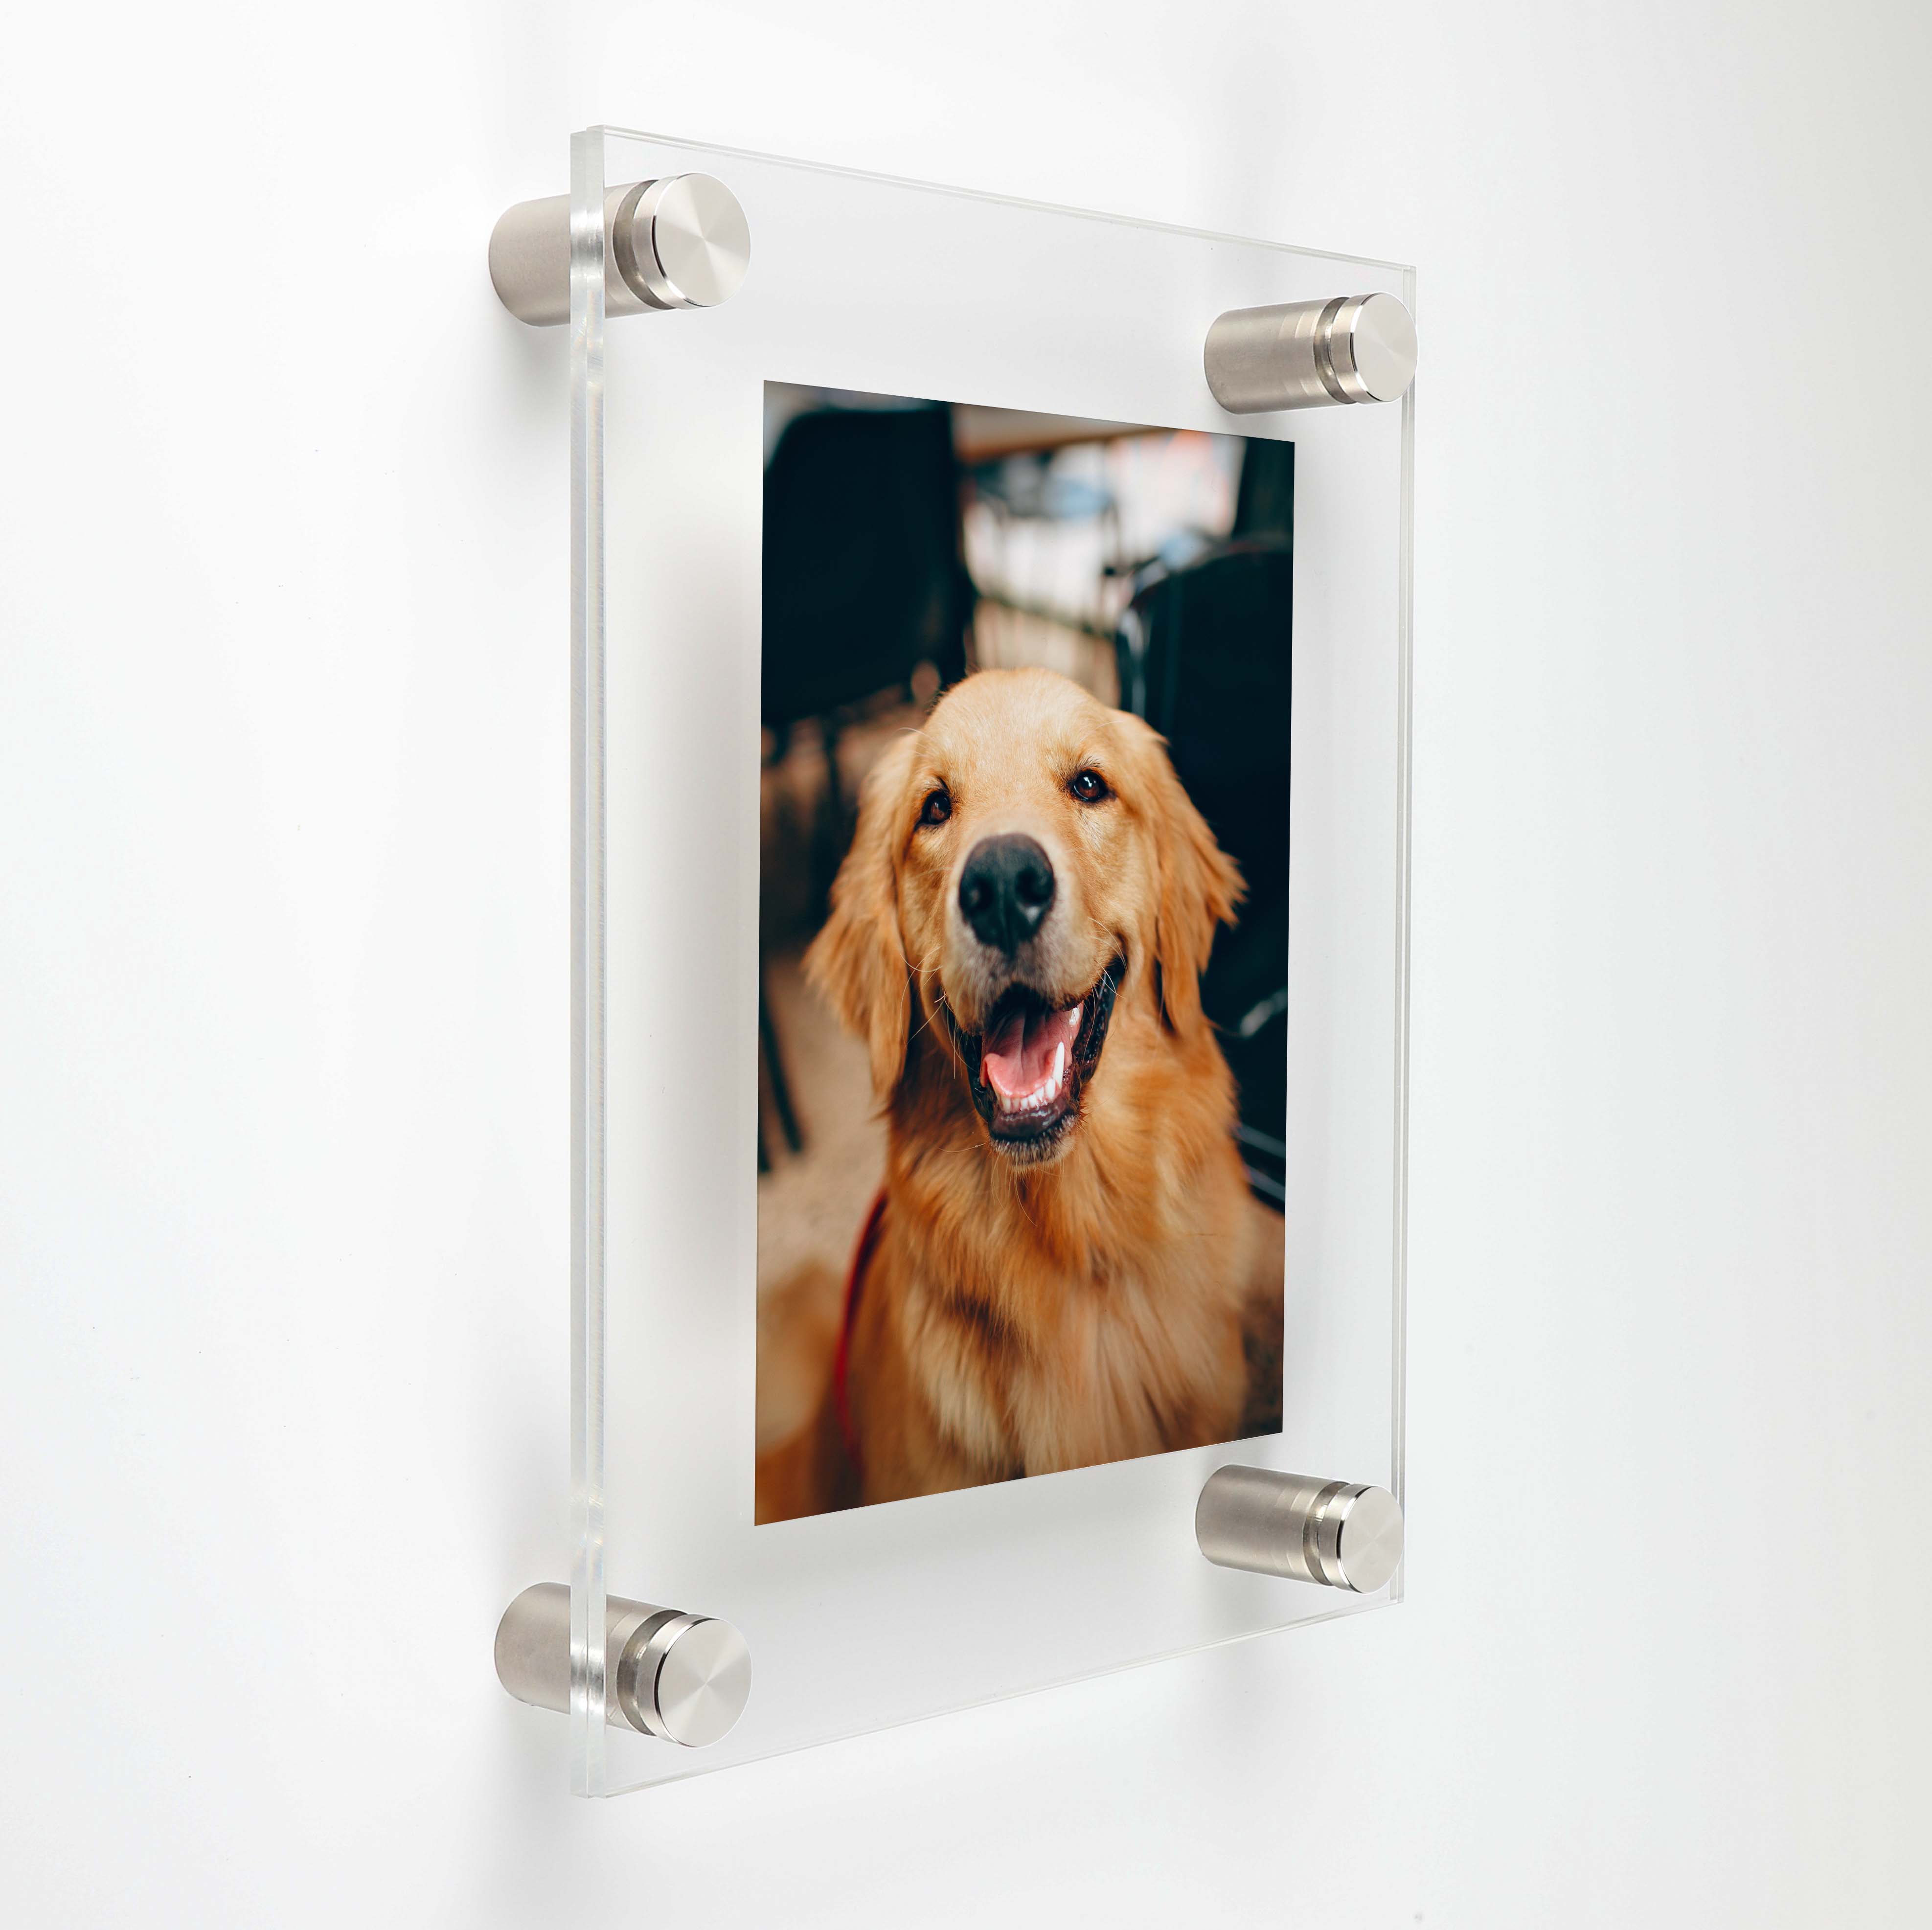 (2) 13-1/2'' x 16-1/2'' Clear Acrylics , Pre-Drilled With Polished Edges (Thick 1/8'' each), Wall Frame with (4) 5/8'' x 3/4'' Brushed Stainless Steel Standoffs includes Screws and Anchors